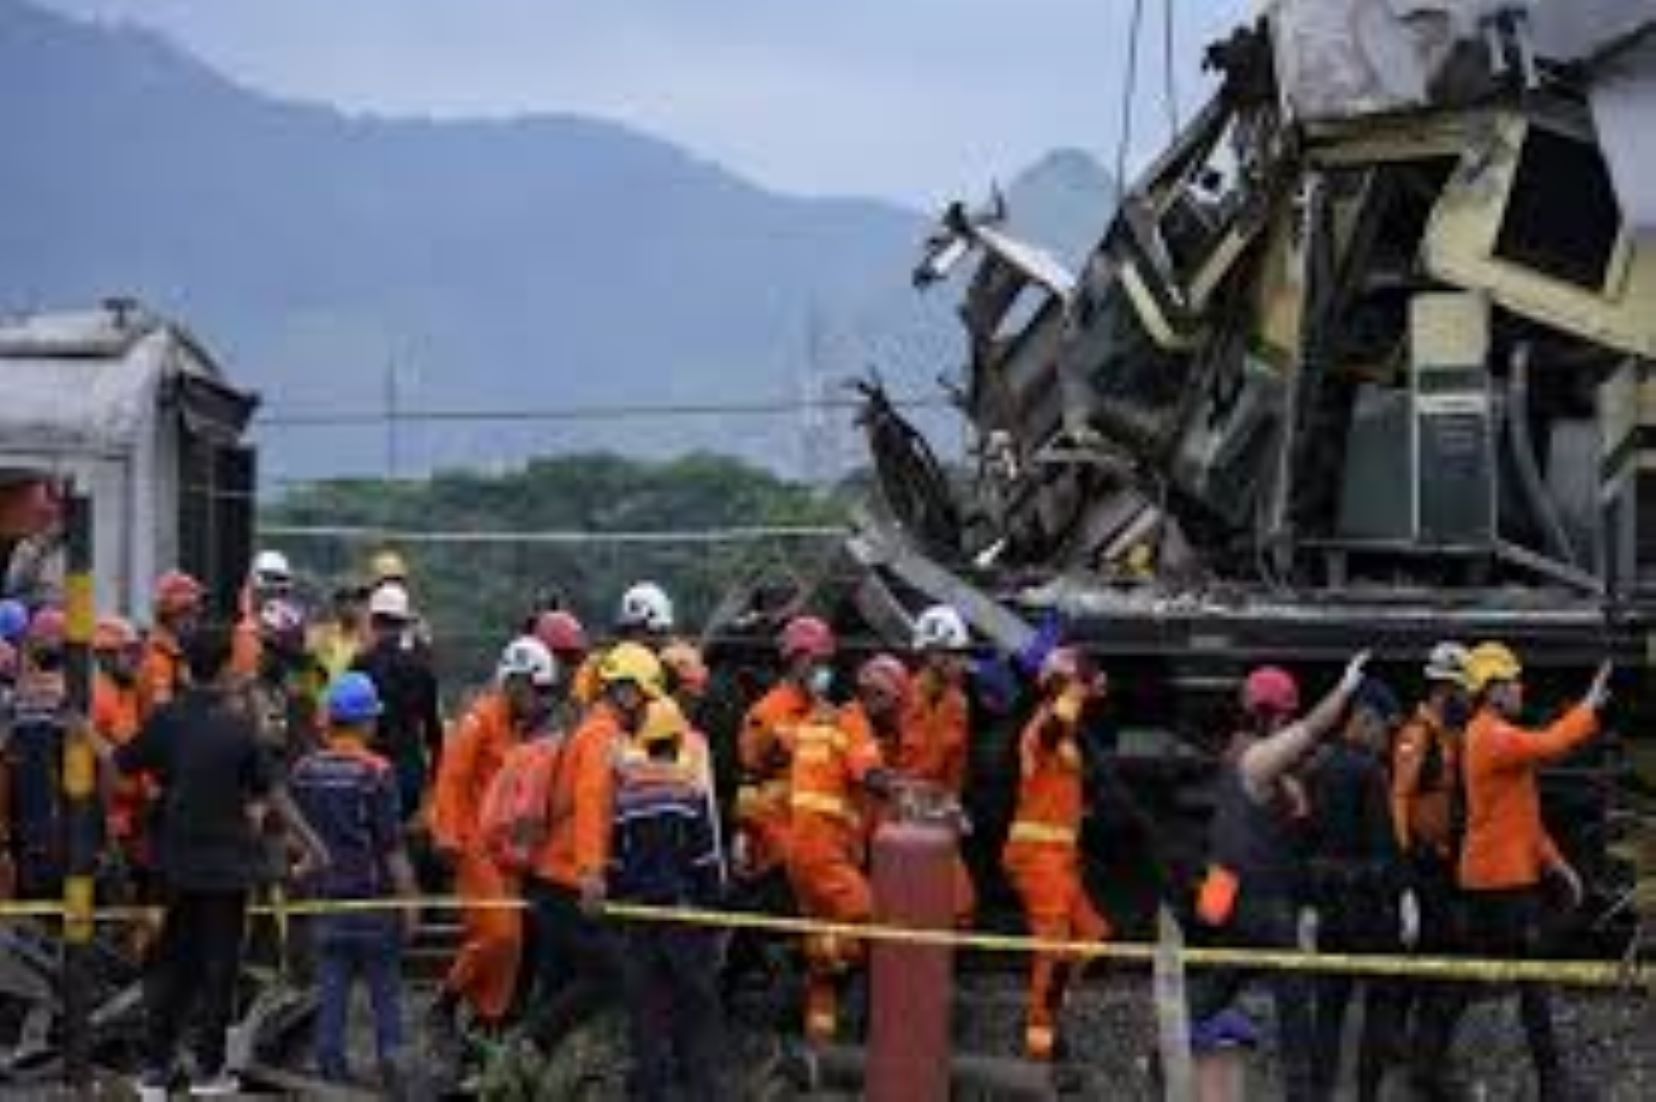 Five Killed, 15 Injured In Train-Bus Collision In Indonesia